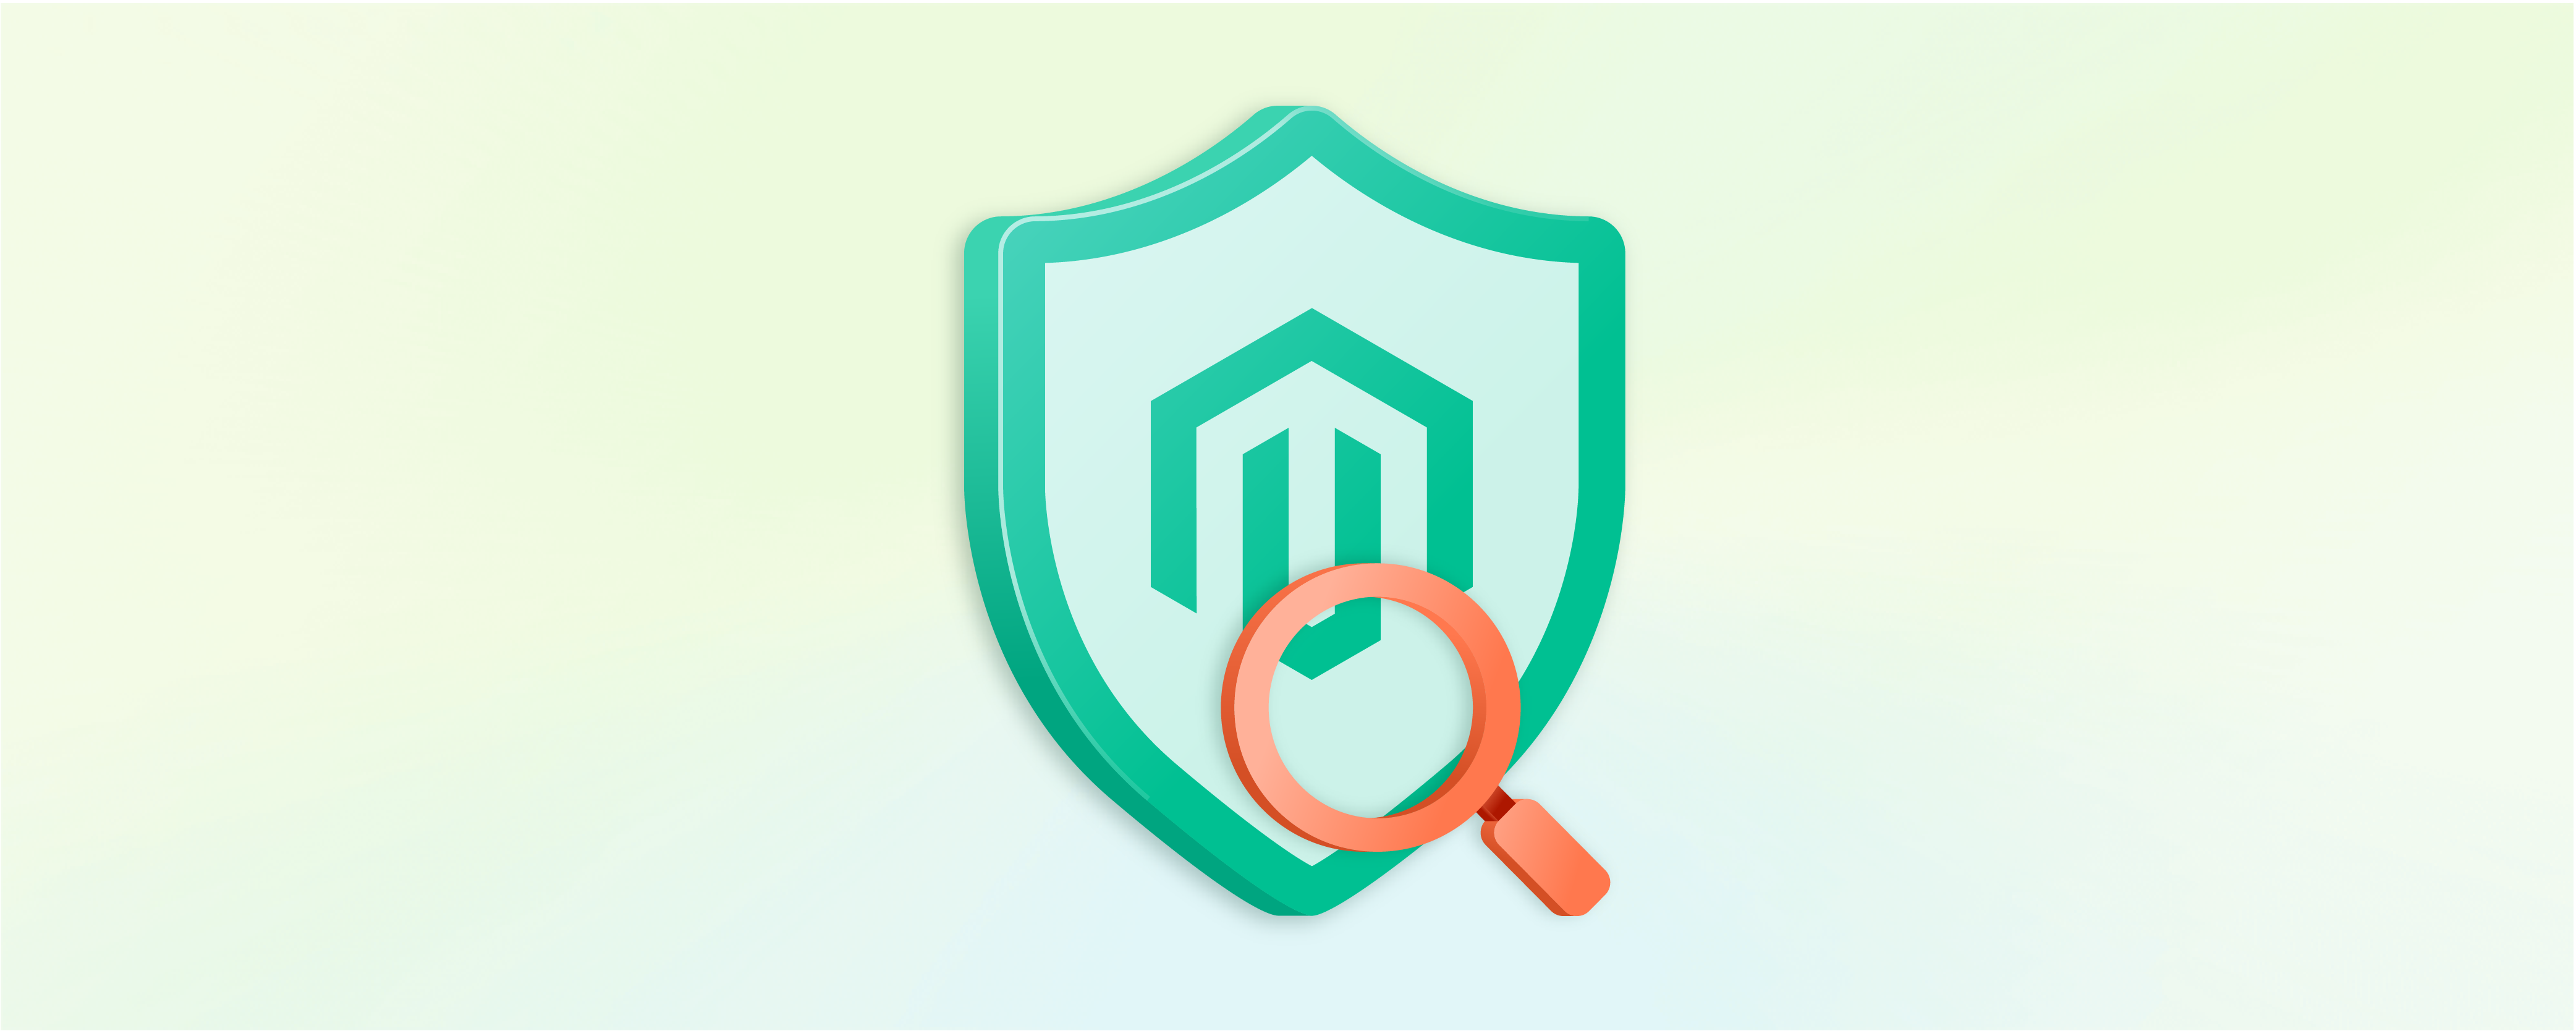 Magento 2 Security Scan: Improving Security of Your Magento Site